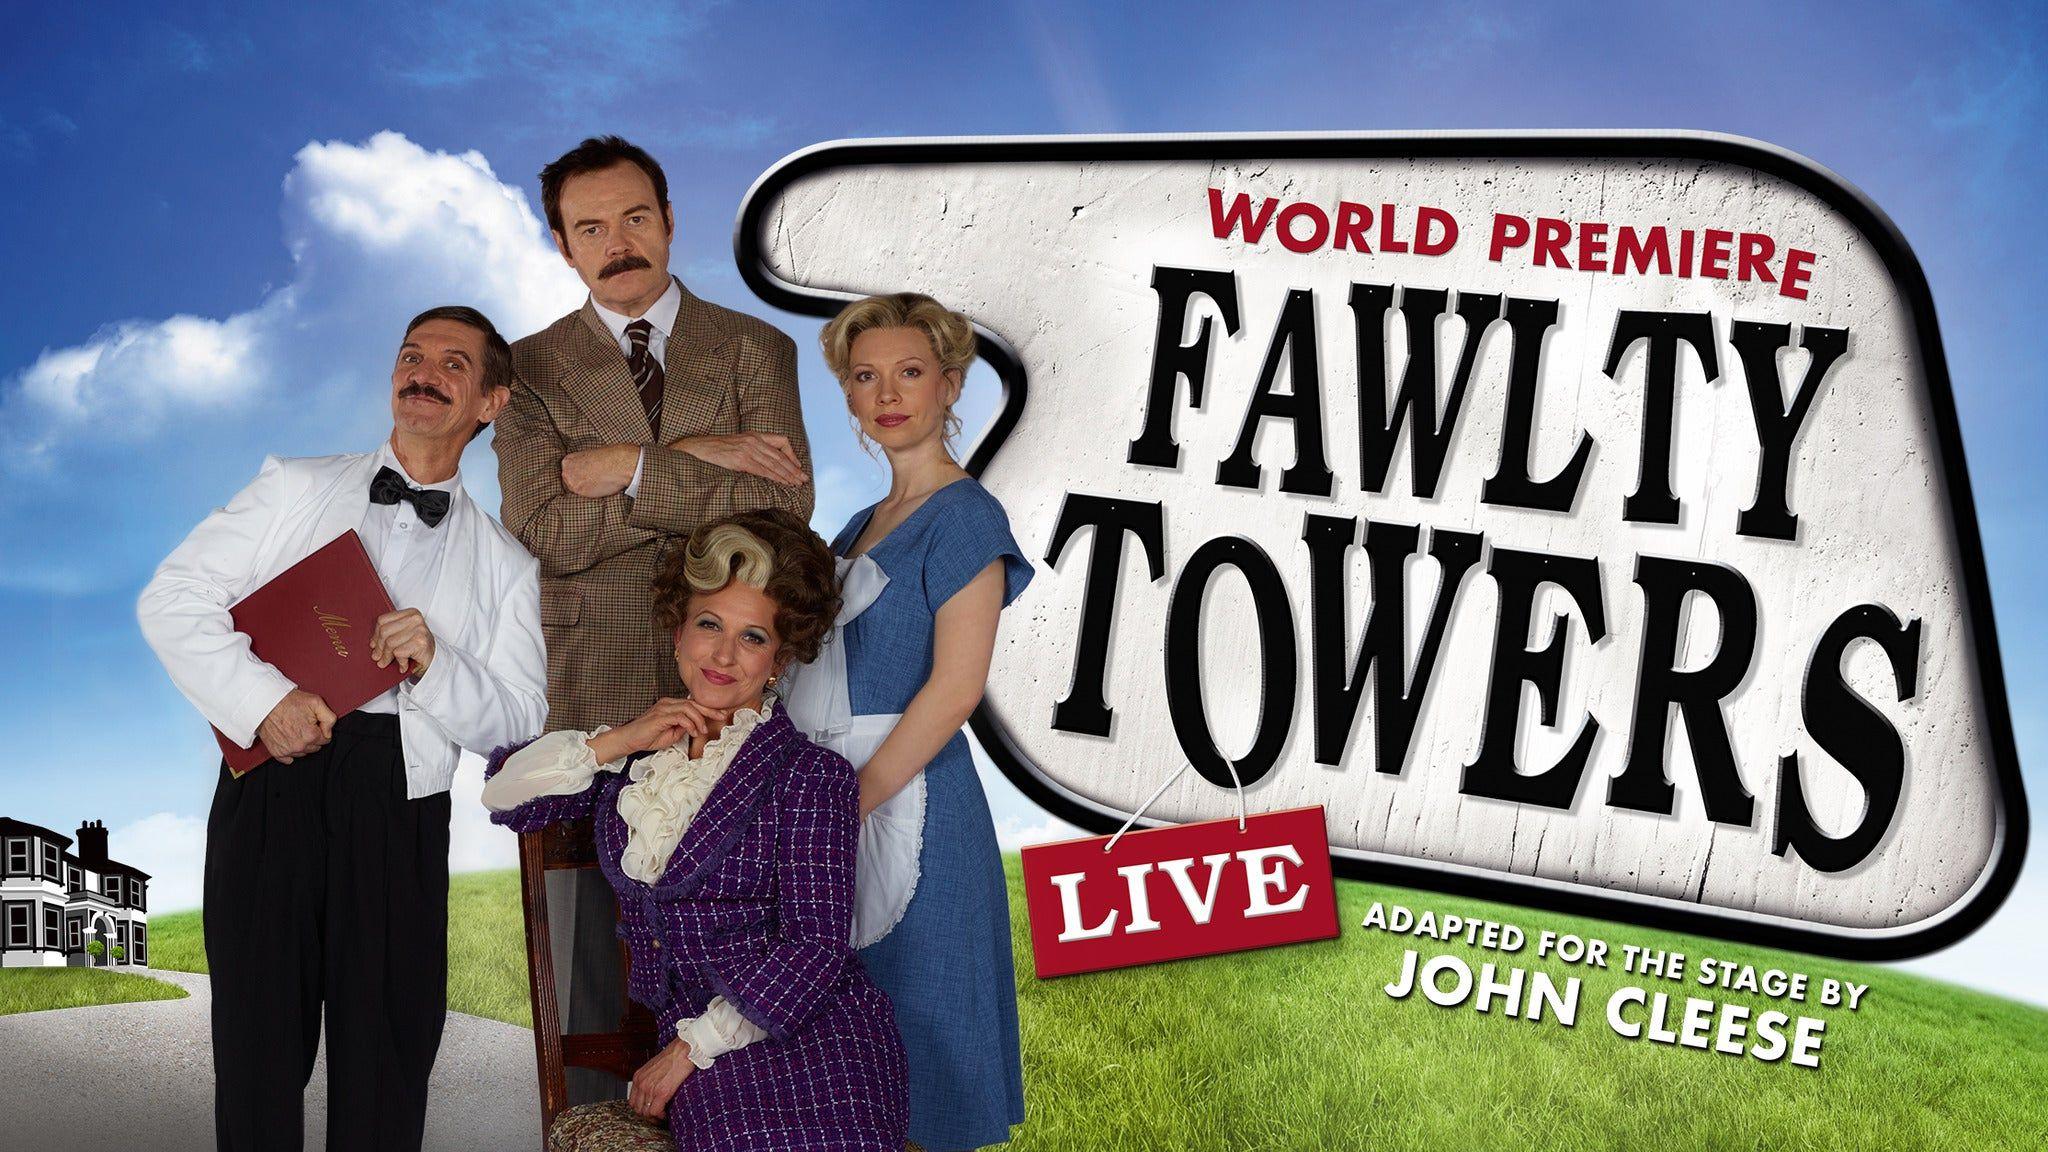 Fawlty Towers - the Play